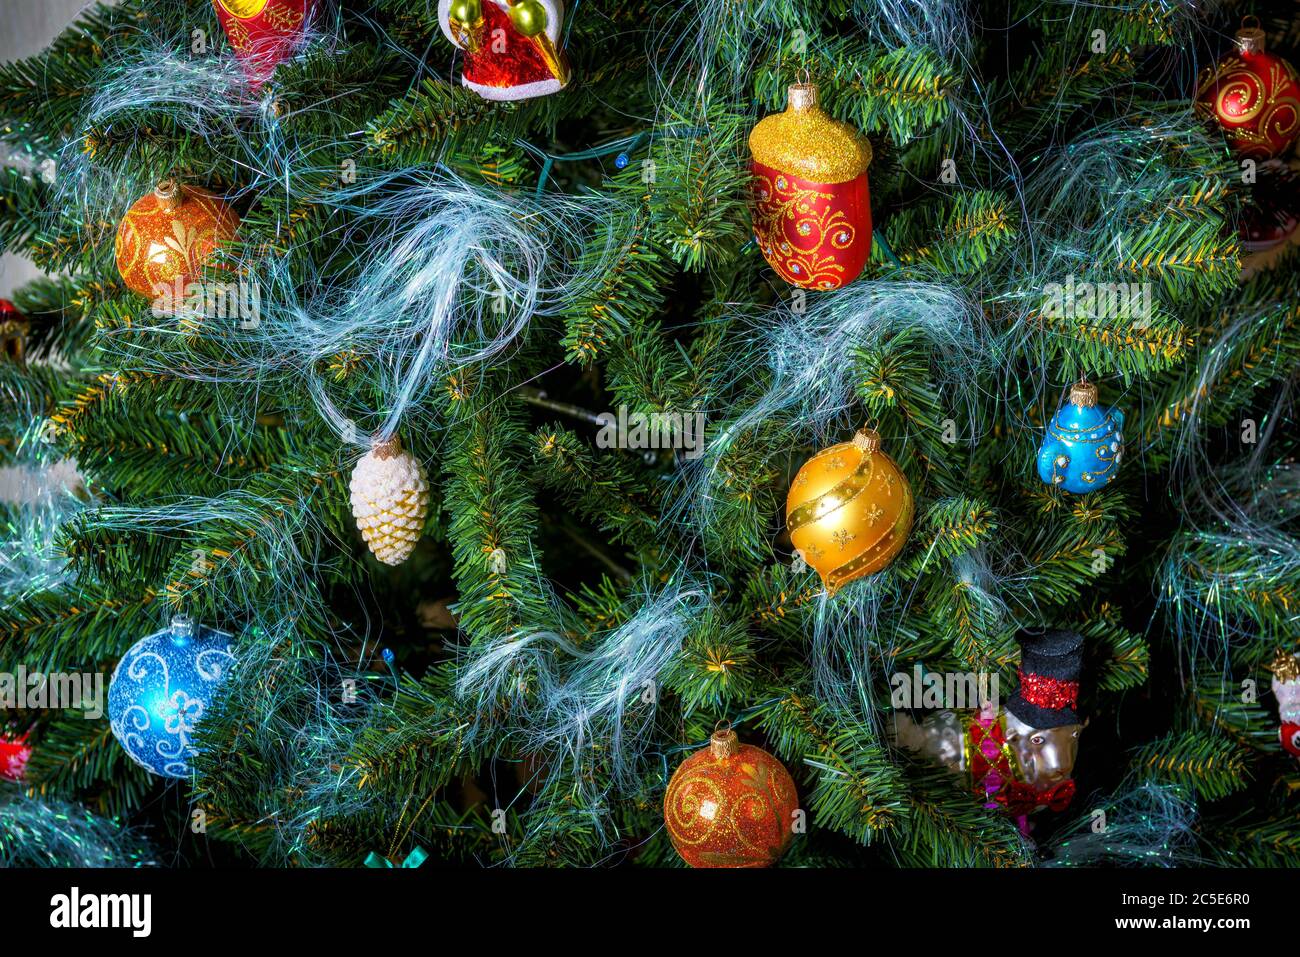 Merry Christmas and Happy New Year. Christmas tree decoration background. Stock Photo